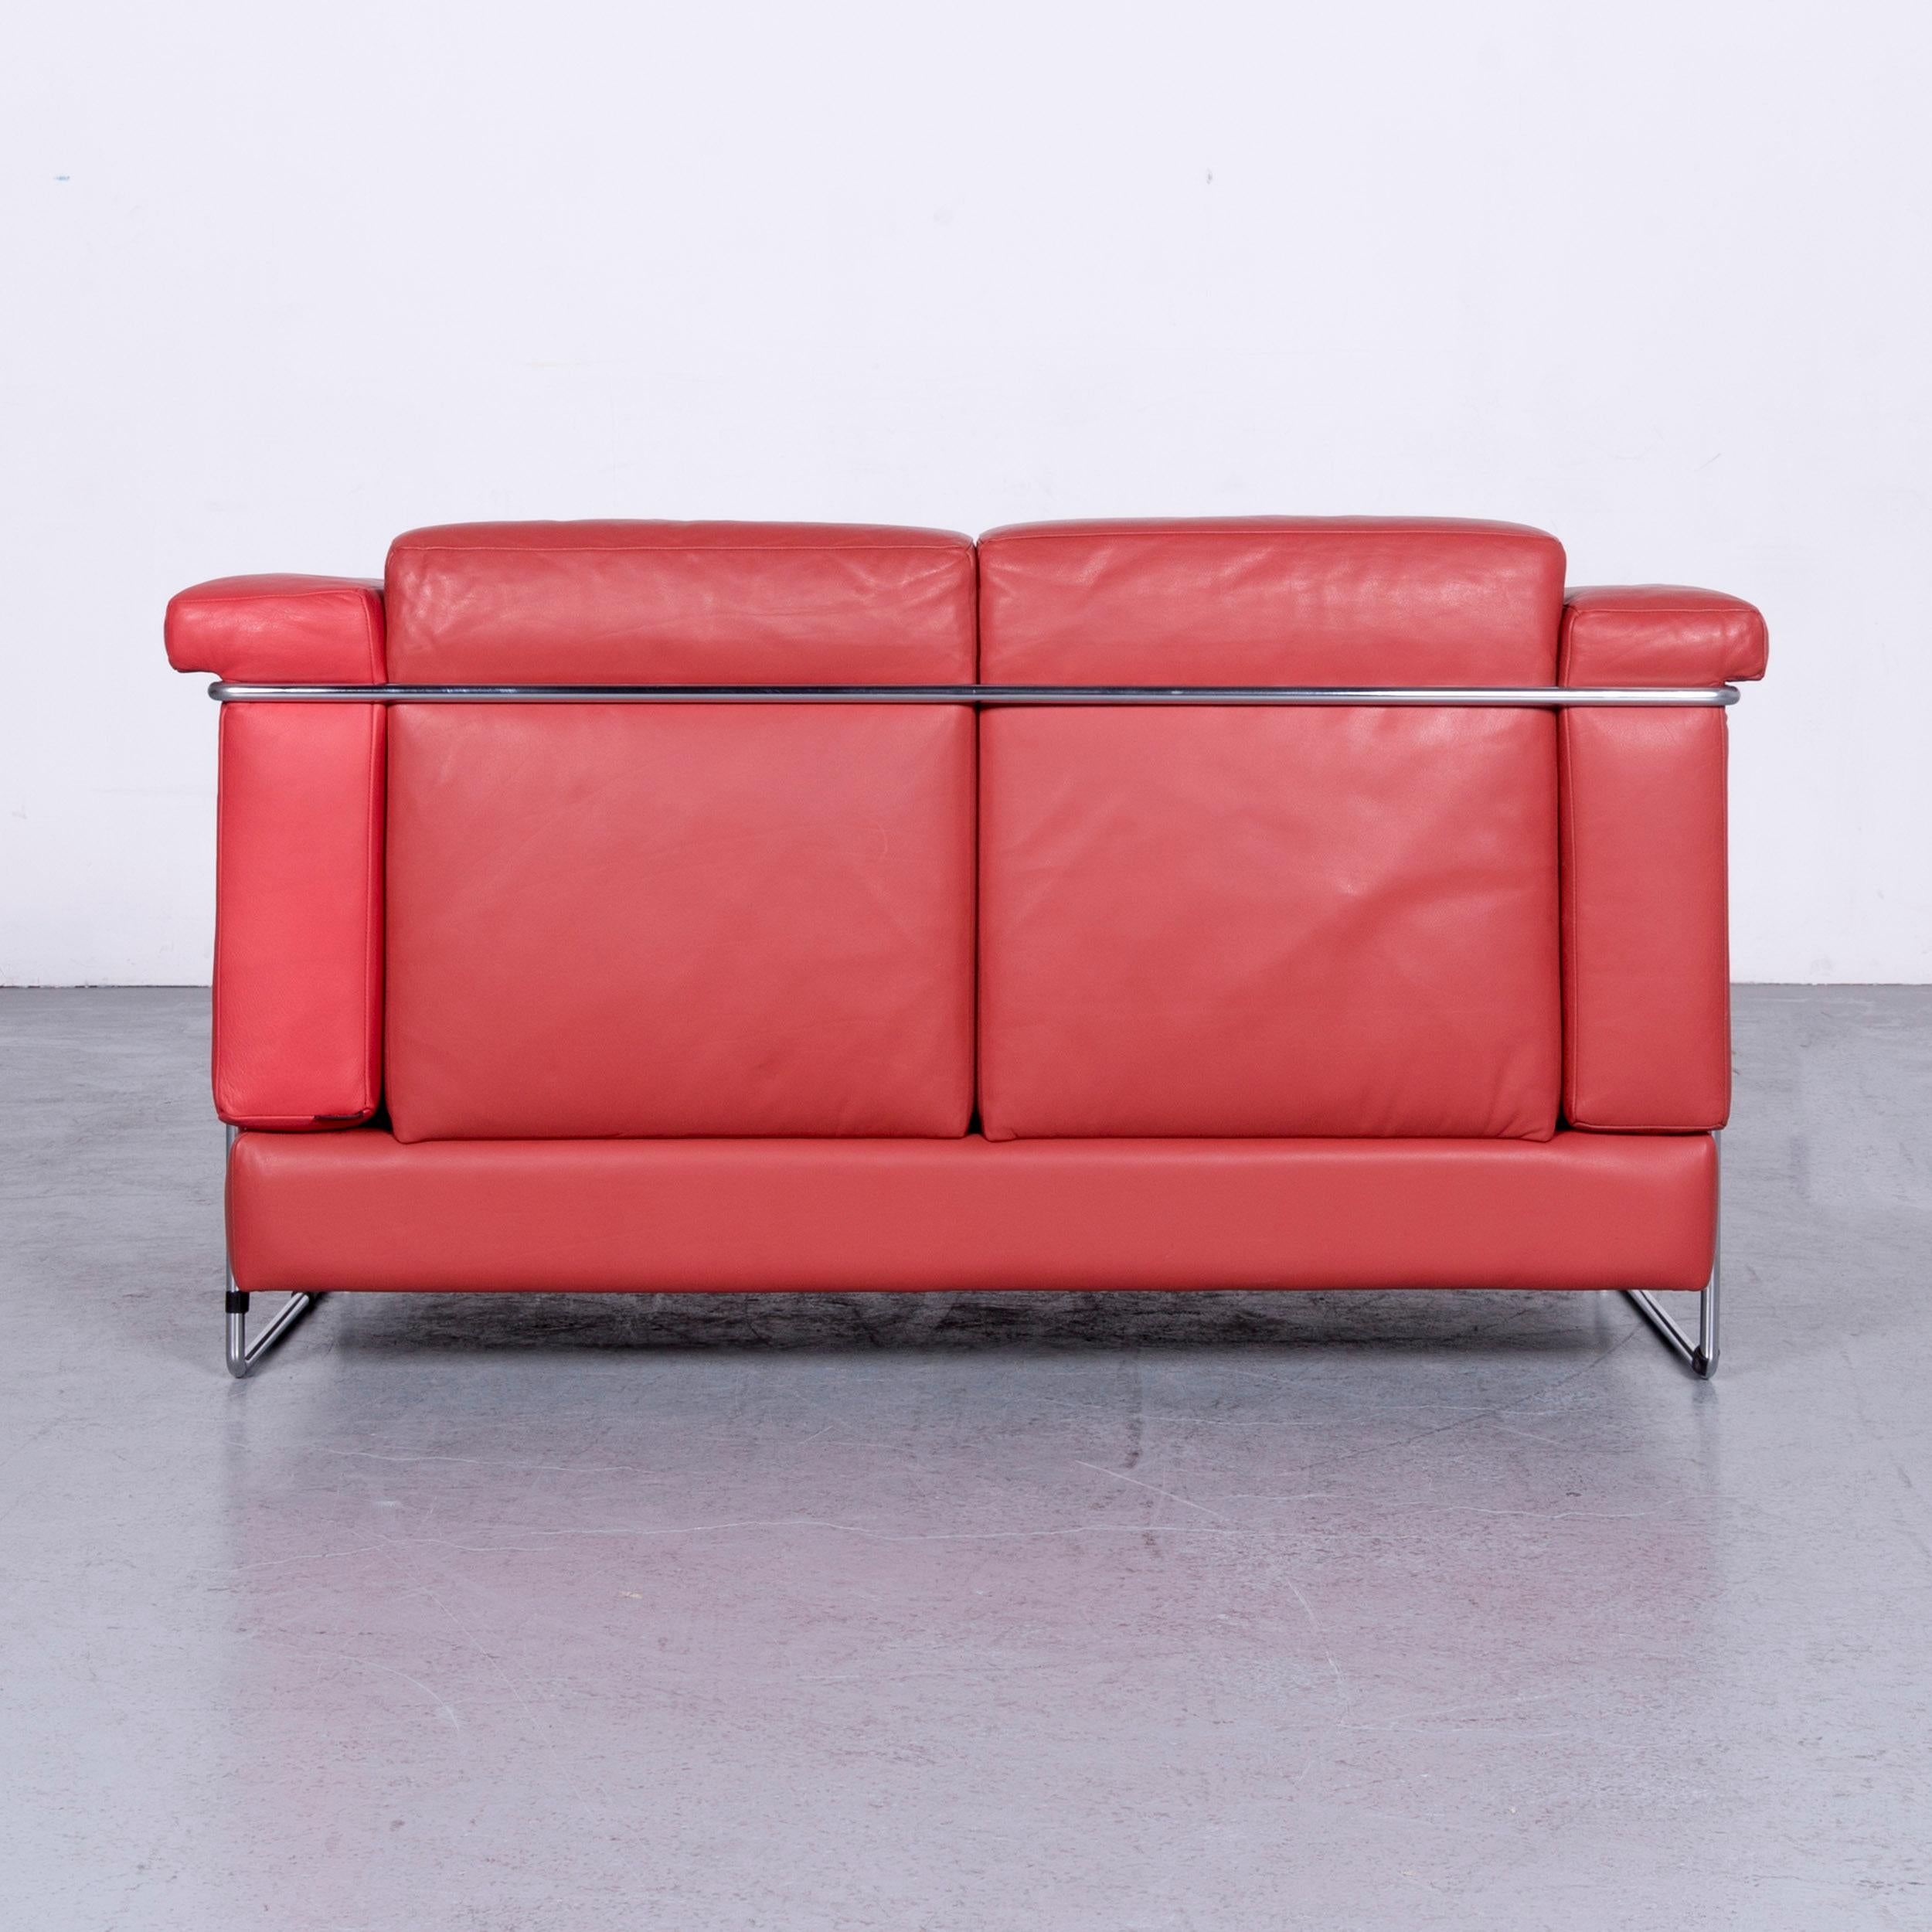 Züco Carat Designer Leather Sofa Set Red Two-Seat Couch 6